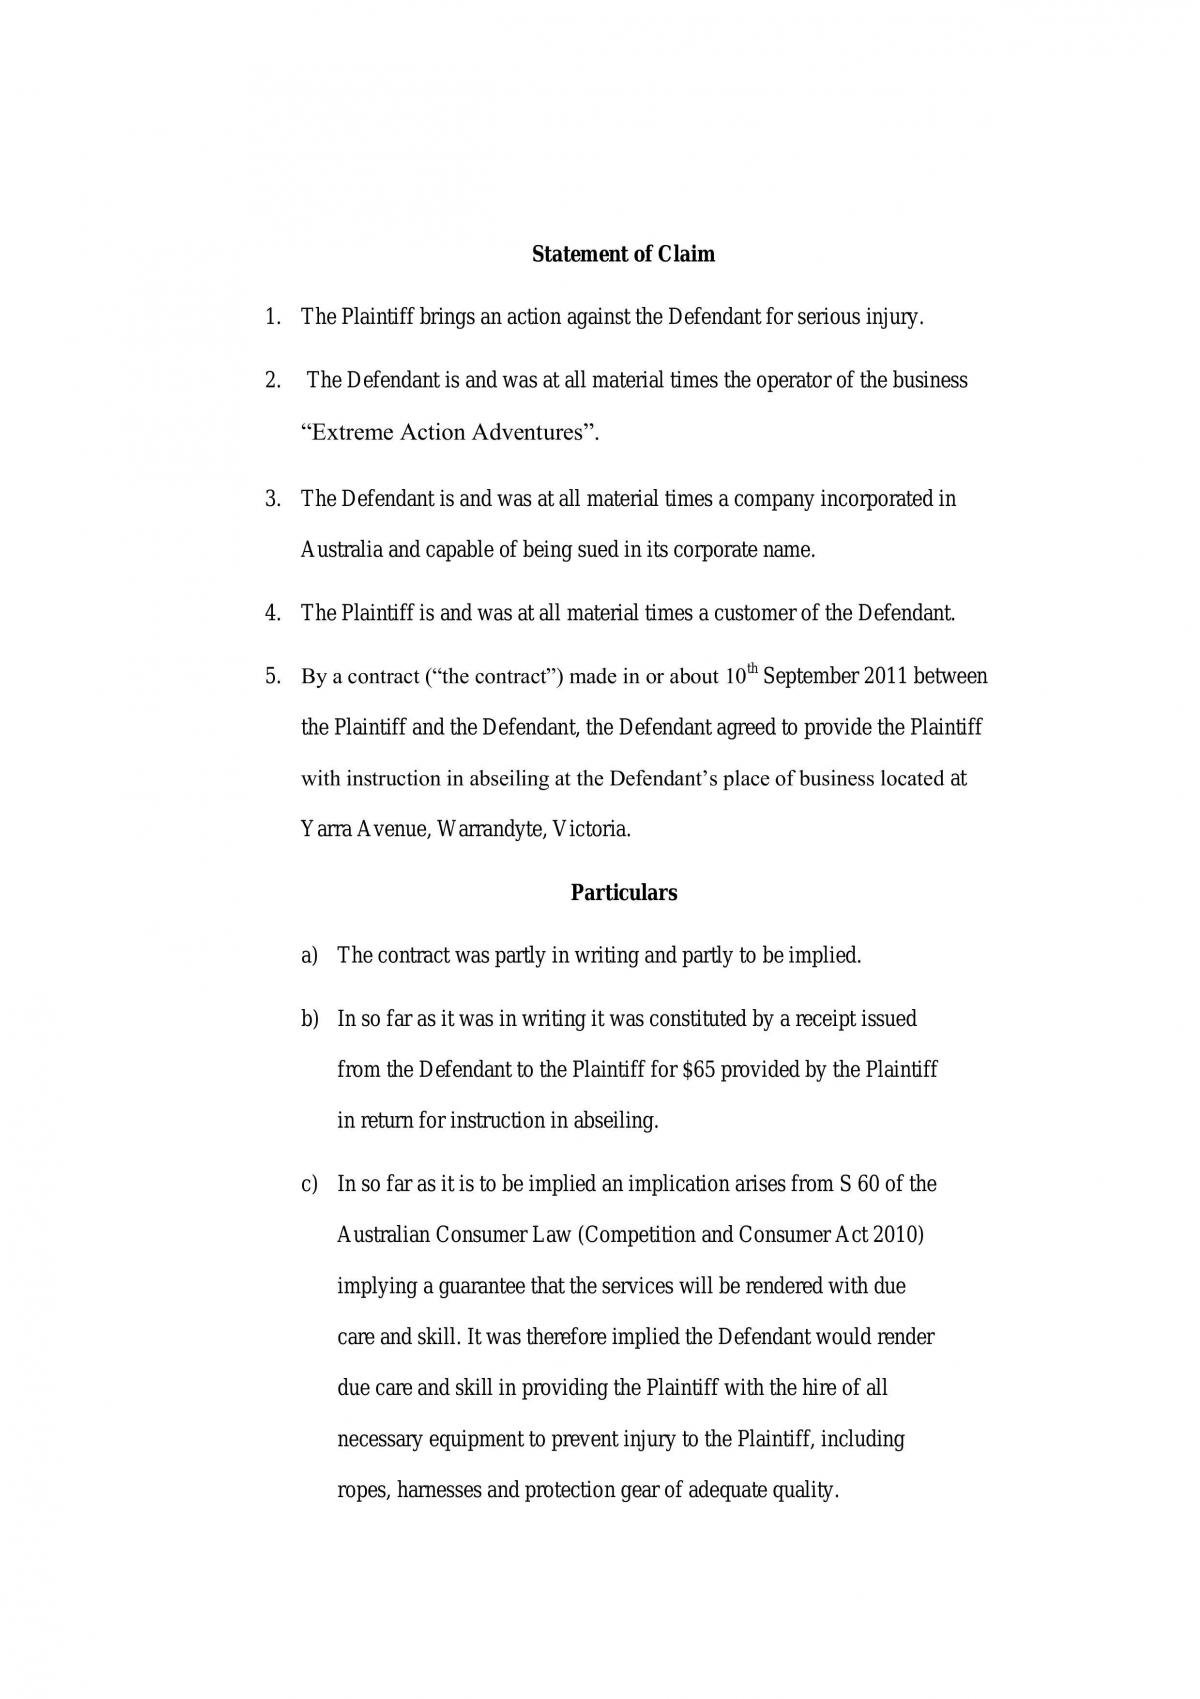 Statement of claim - Page 1